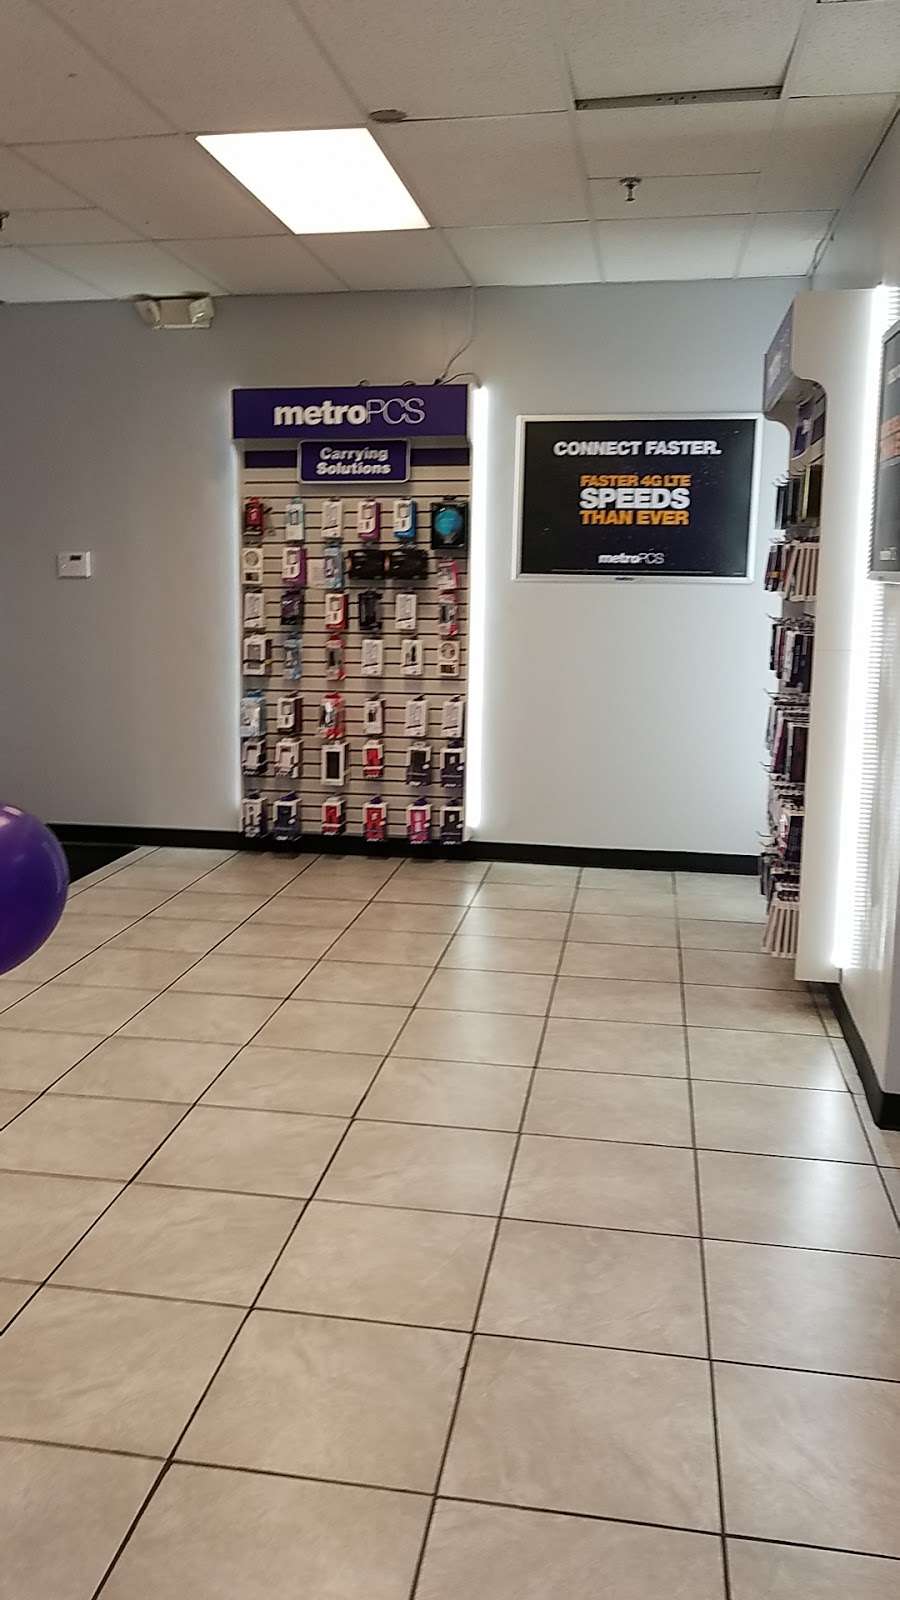 Metro by T-Mobile | 4897 Kentucky Ave, Indianapolis, IN 46221 | Phone: (317) 455-1546